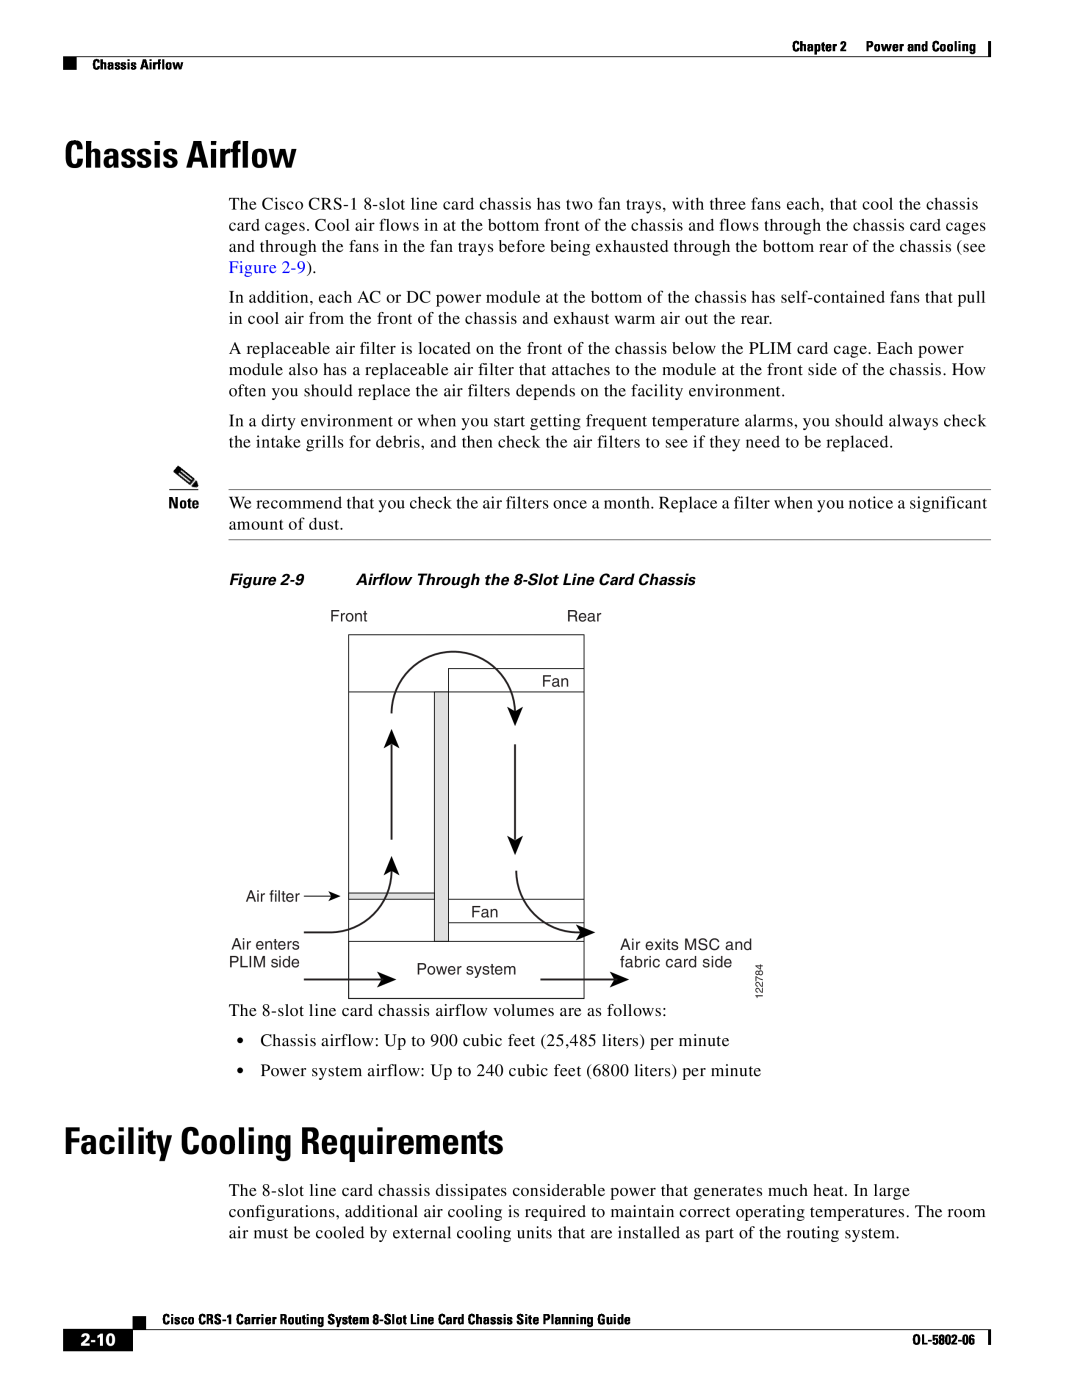 Cisco Systems CRS-1 manual Chassis Airflow, Facility Cooling Requirements, 2-10 